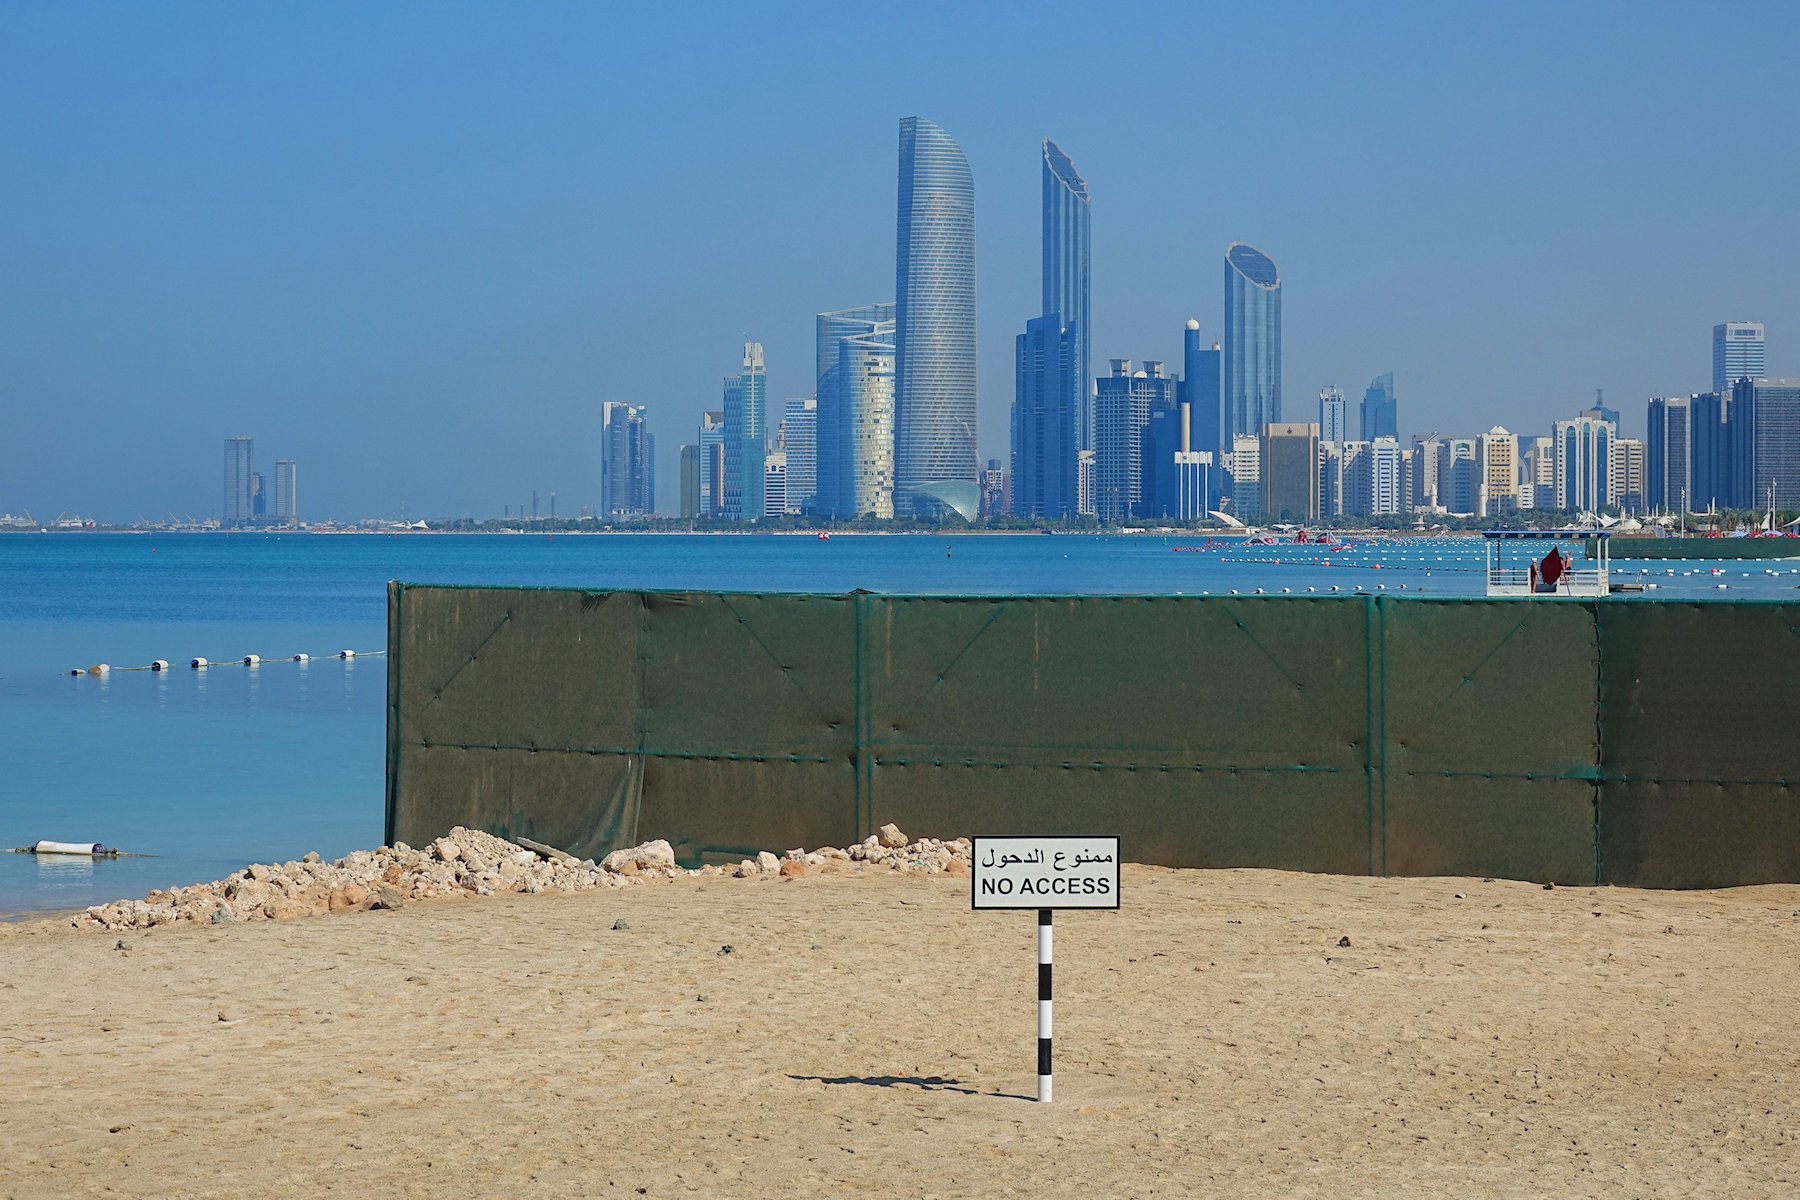 Abu Dhabi is open for visitors, sort of.